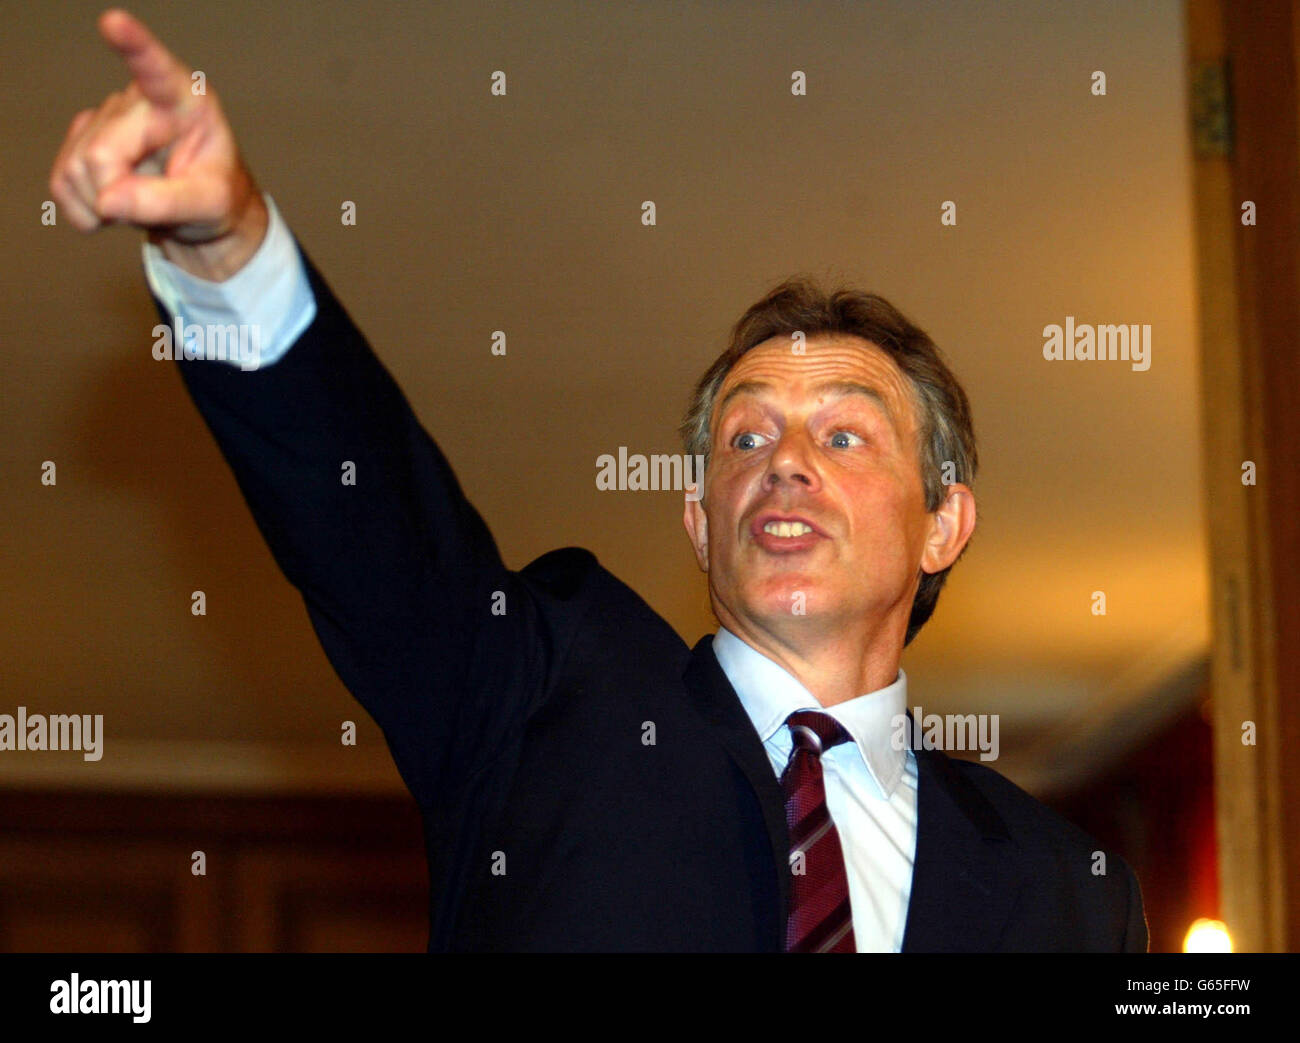 Prime Minister Tony Blair speaks at a Downing Street Press Conference. Blair said Monday that the Iraqi leader Saddam Hussein can still peacefully end the standoff over weapons of mass destruction, * ... but warned that he will be disarmed by force if he does not. Stock Photo